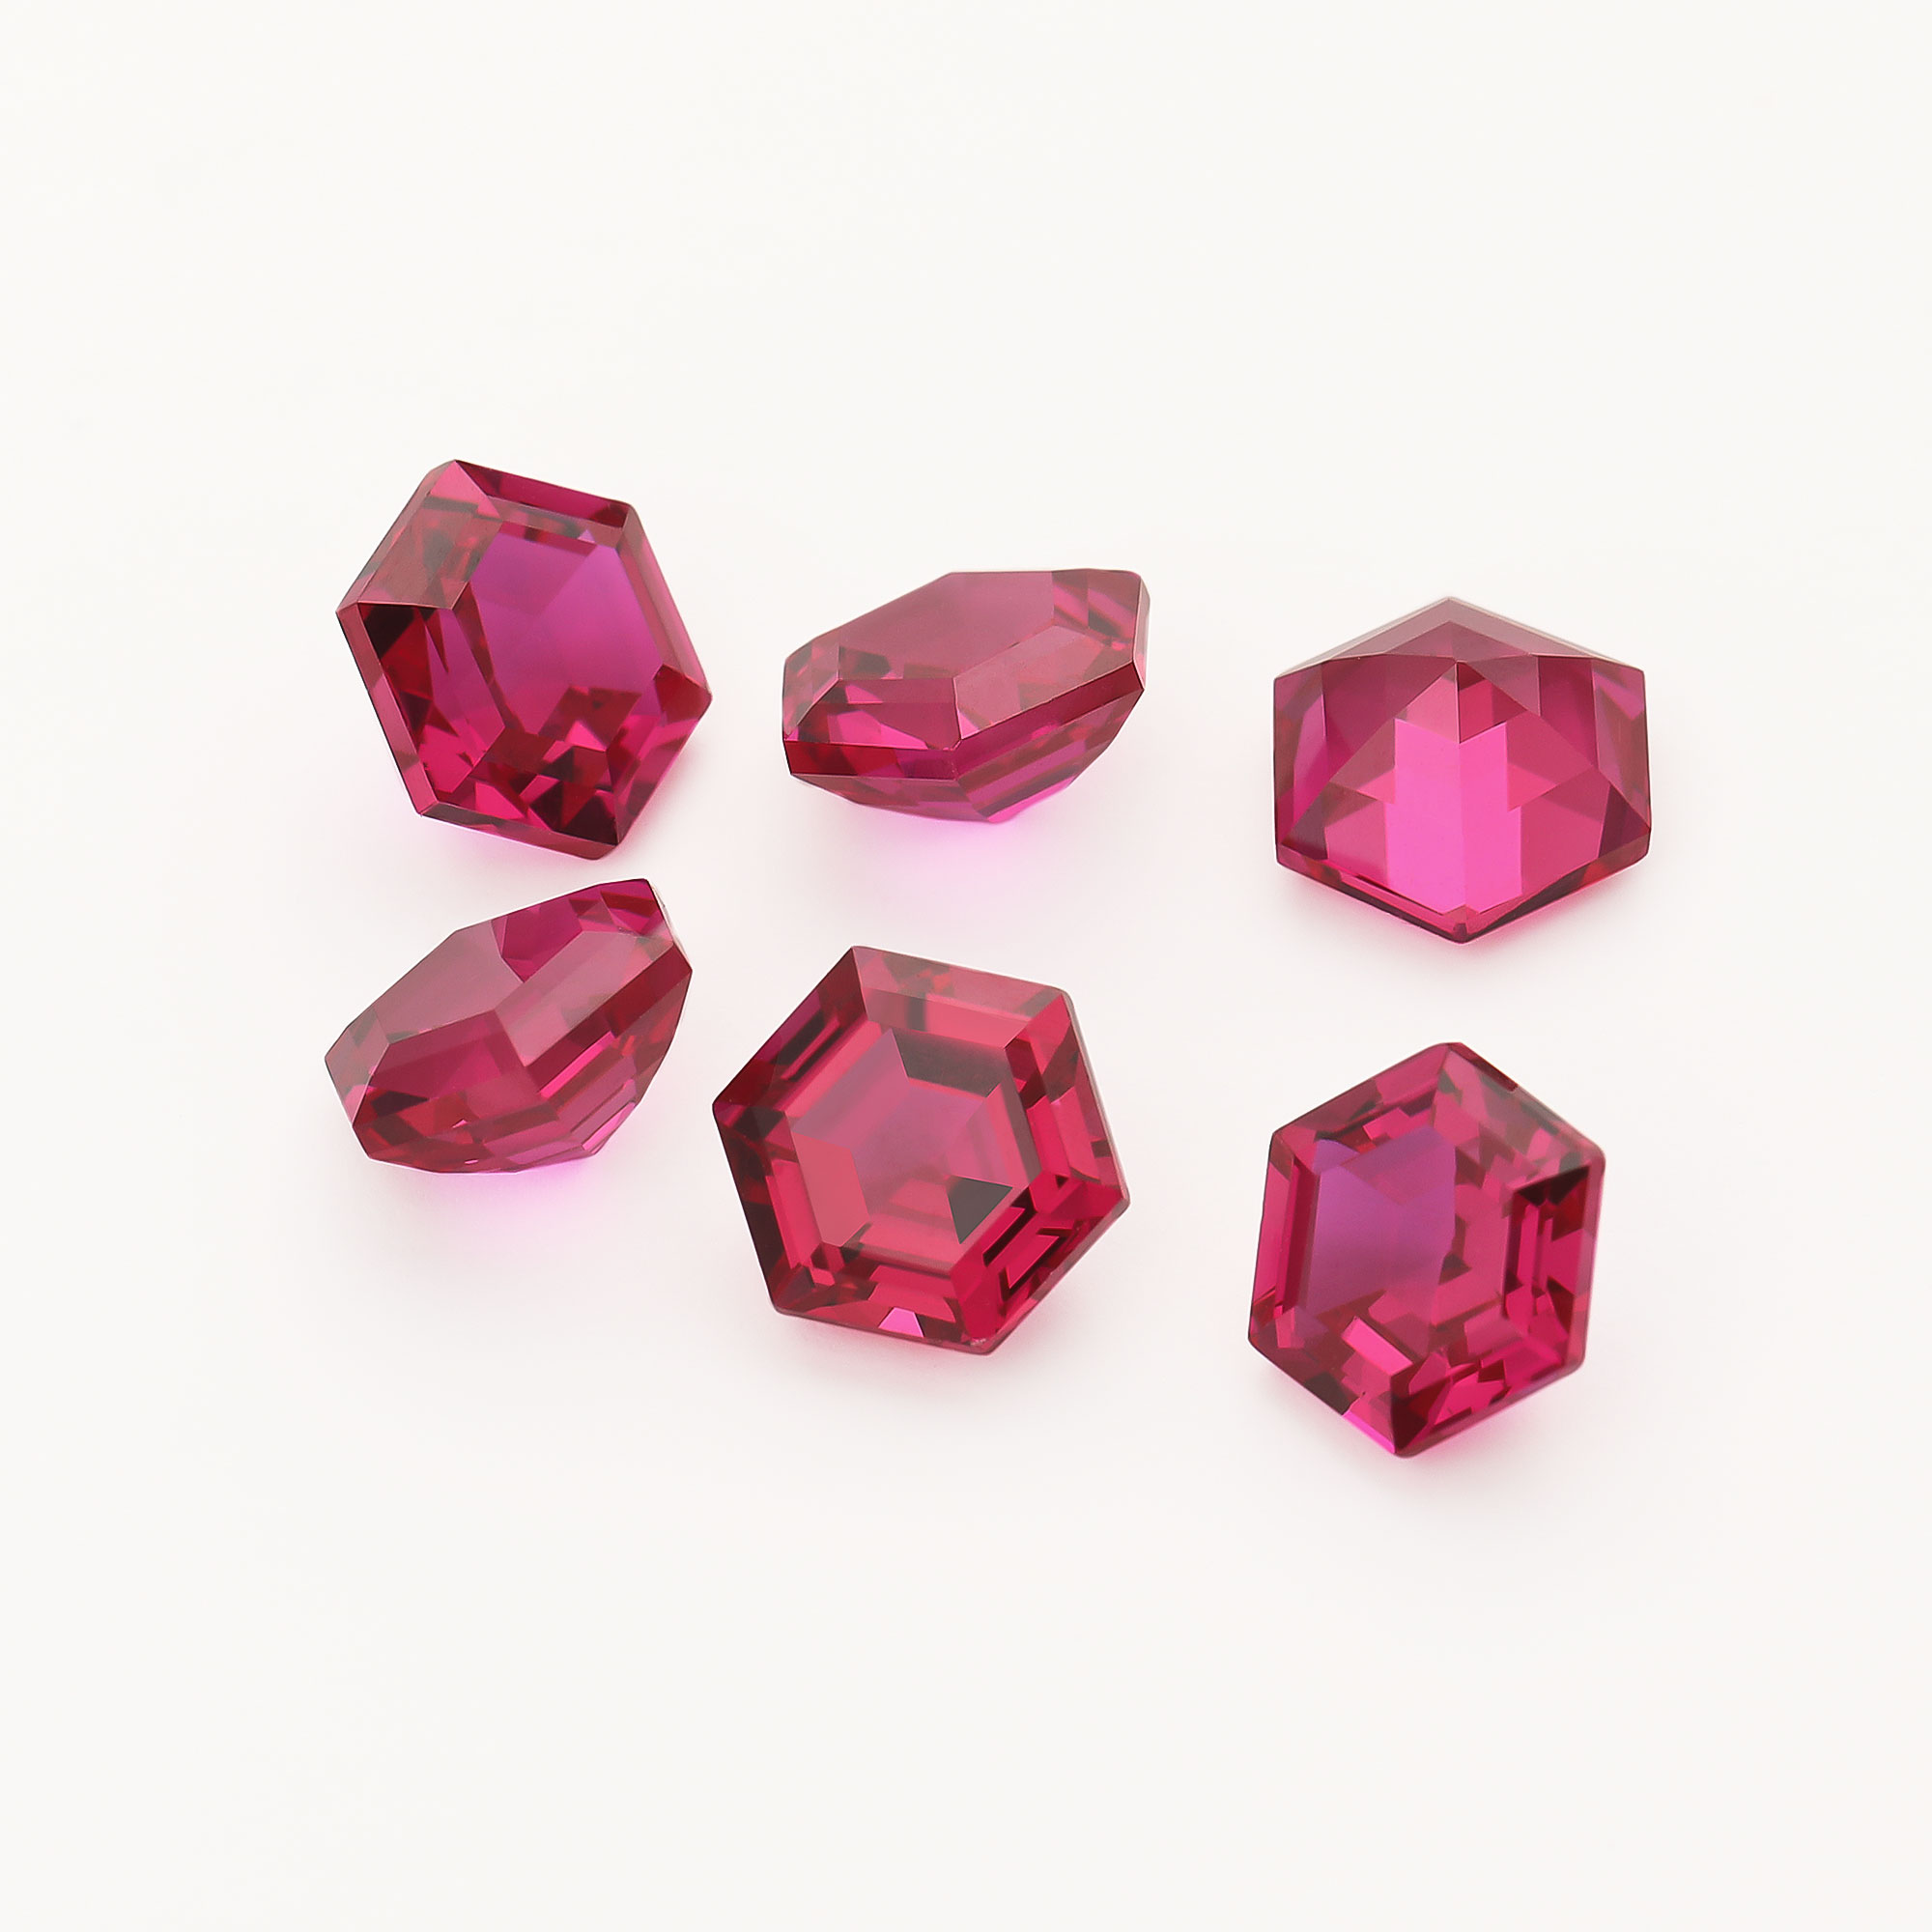 1Pcs Hexagon Cut Ruby Faceted Stone Lab Created,July Birthstone,Red Faceted Loose Gemstone,DIY Jewelry Supplies 4160063 - Click Image to Close